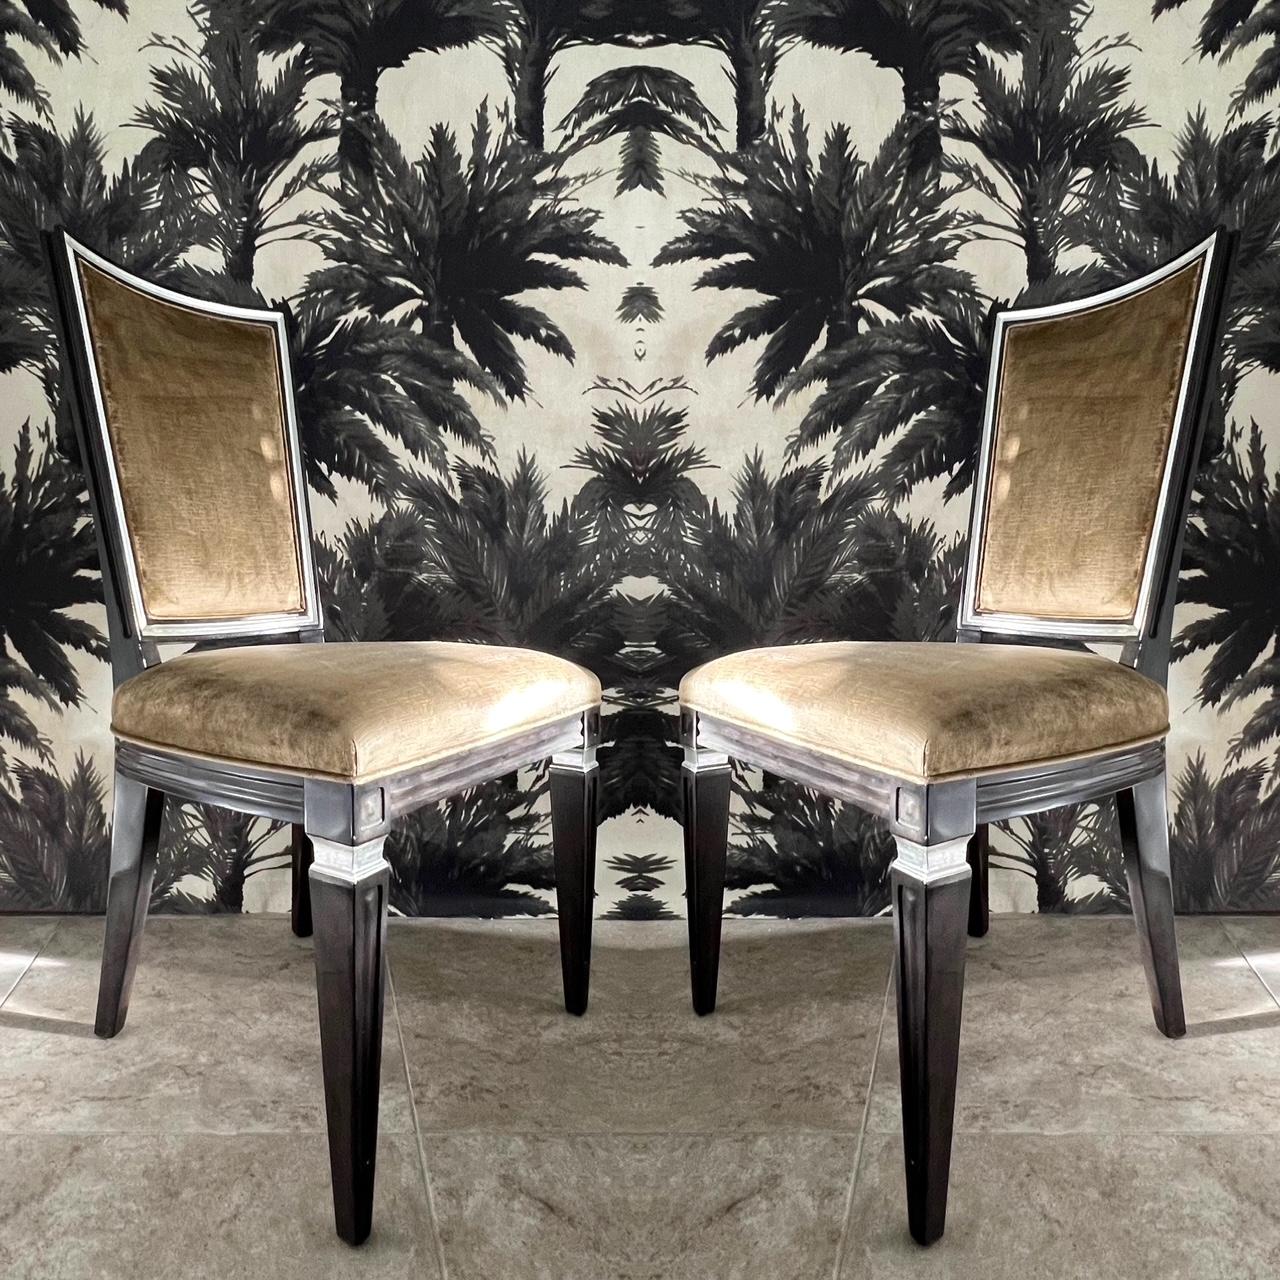 Pair of 1940's neoclassical Revival side chairs with elegant highback design. Upholstered in mushroom or taupe colored crushed velvet. The chairs have a Swedish Gustavian inspired design with carved notched frames with an ebonized finish and with